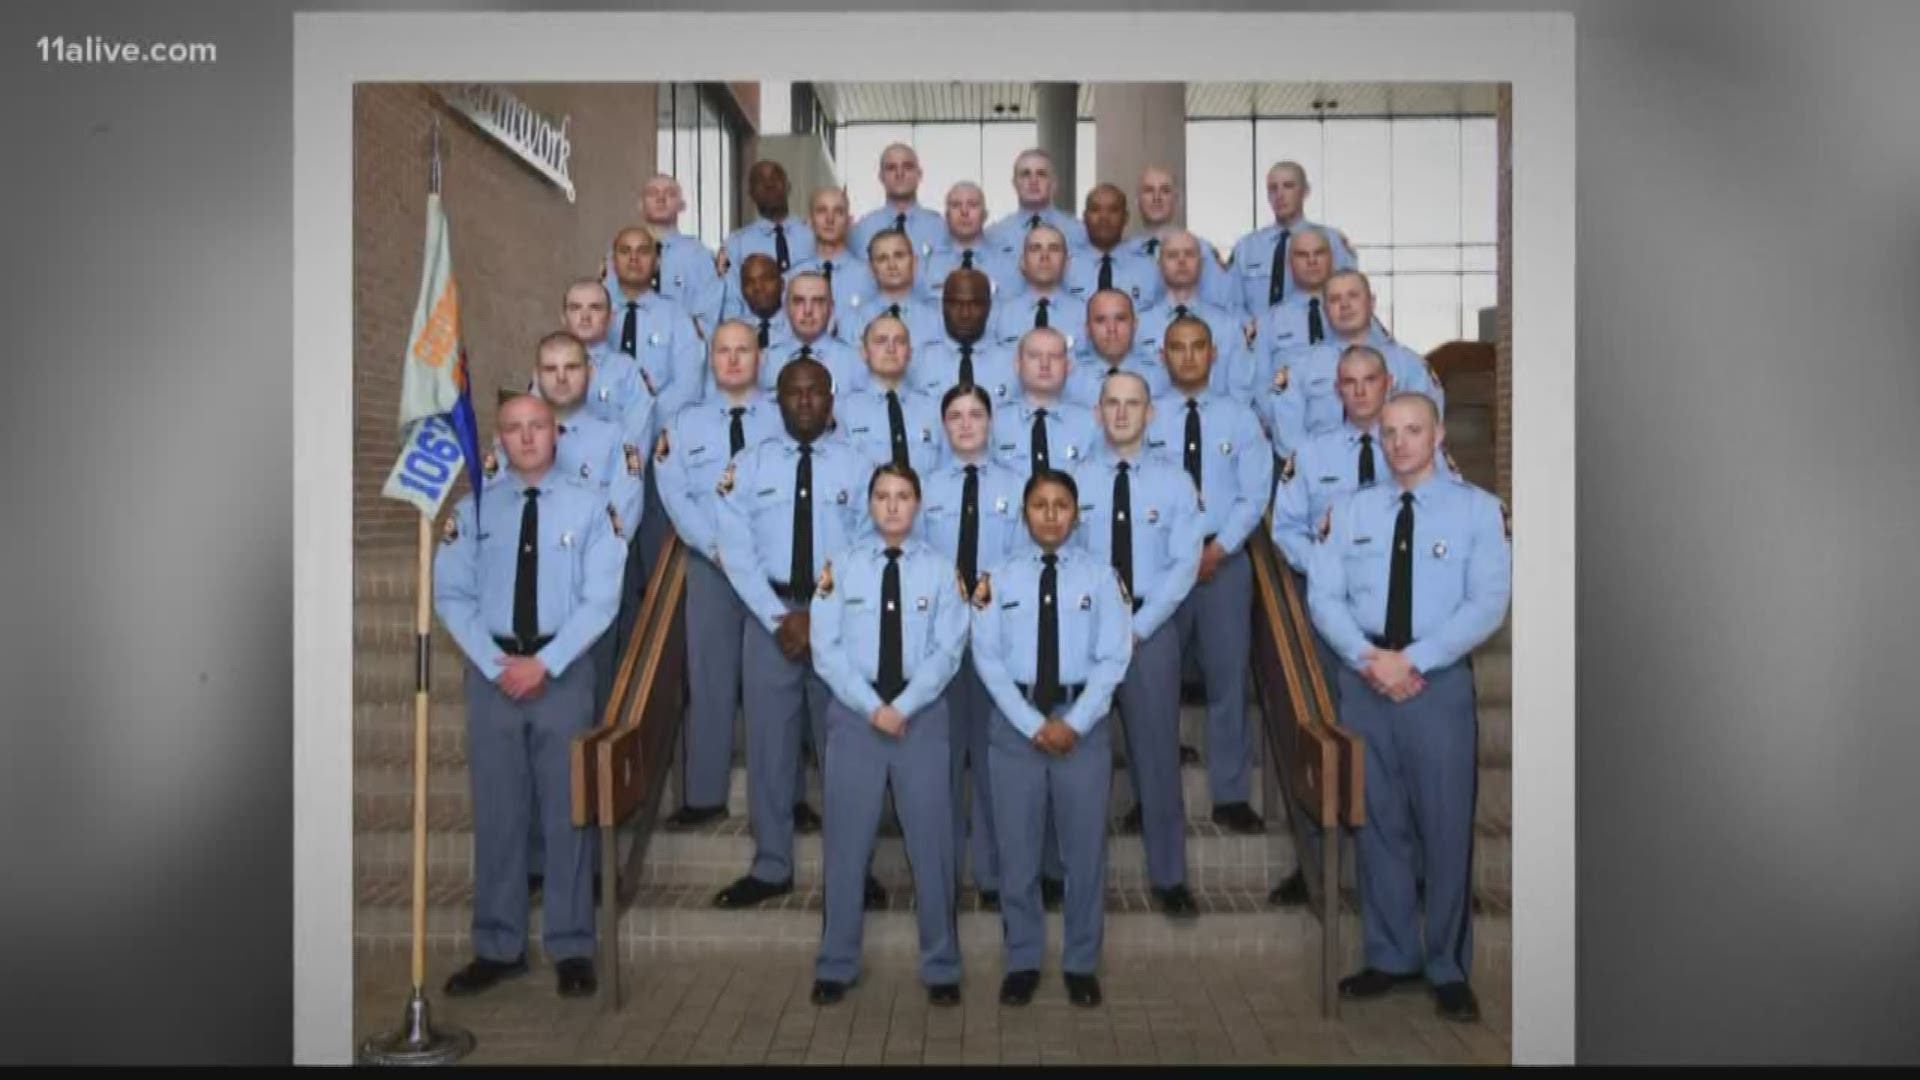 The cost of losing an entire Trooper School graduating class is more than $1.8 million, according to the Georgia State Patrol.